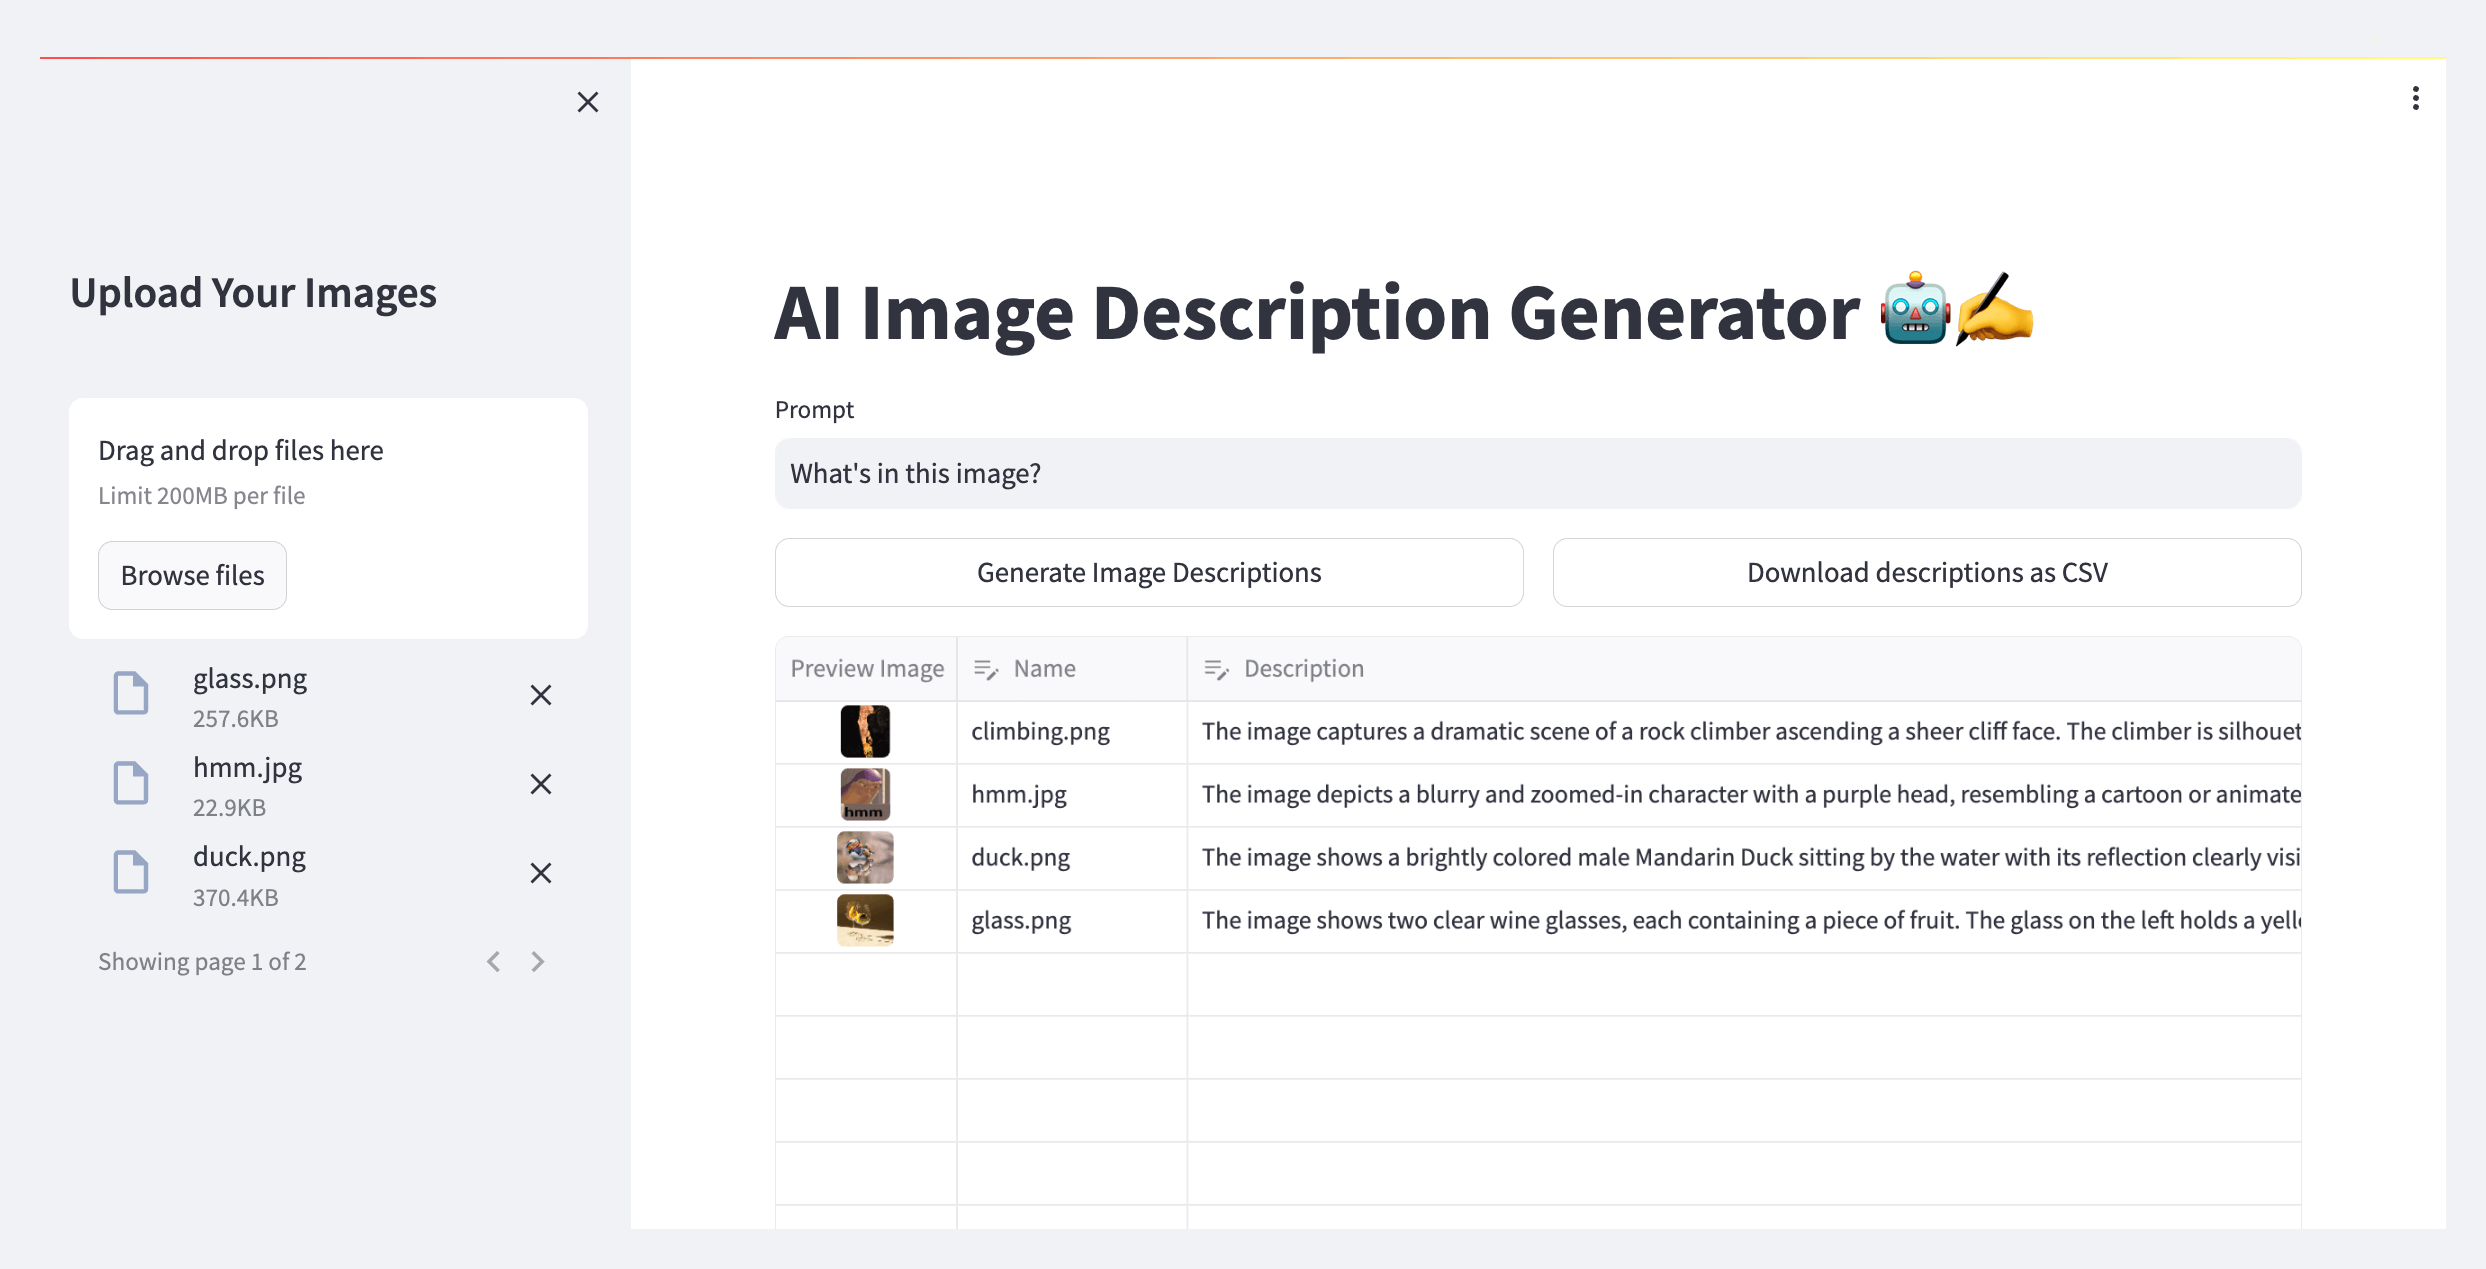 The final version Streamlit app to generate image descriptions using GPT-4 Vision.